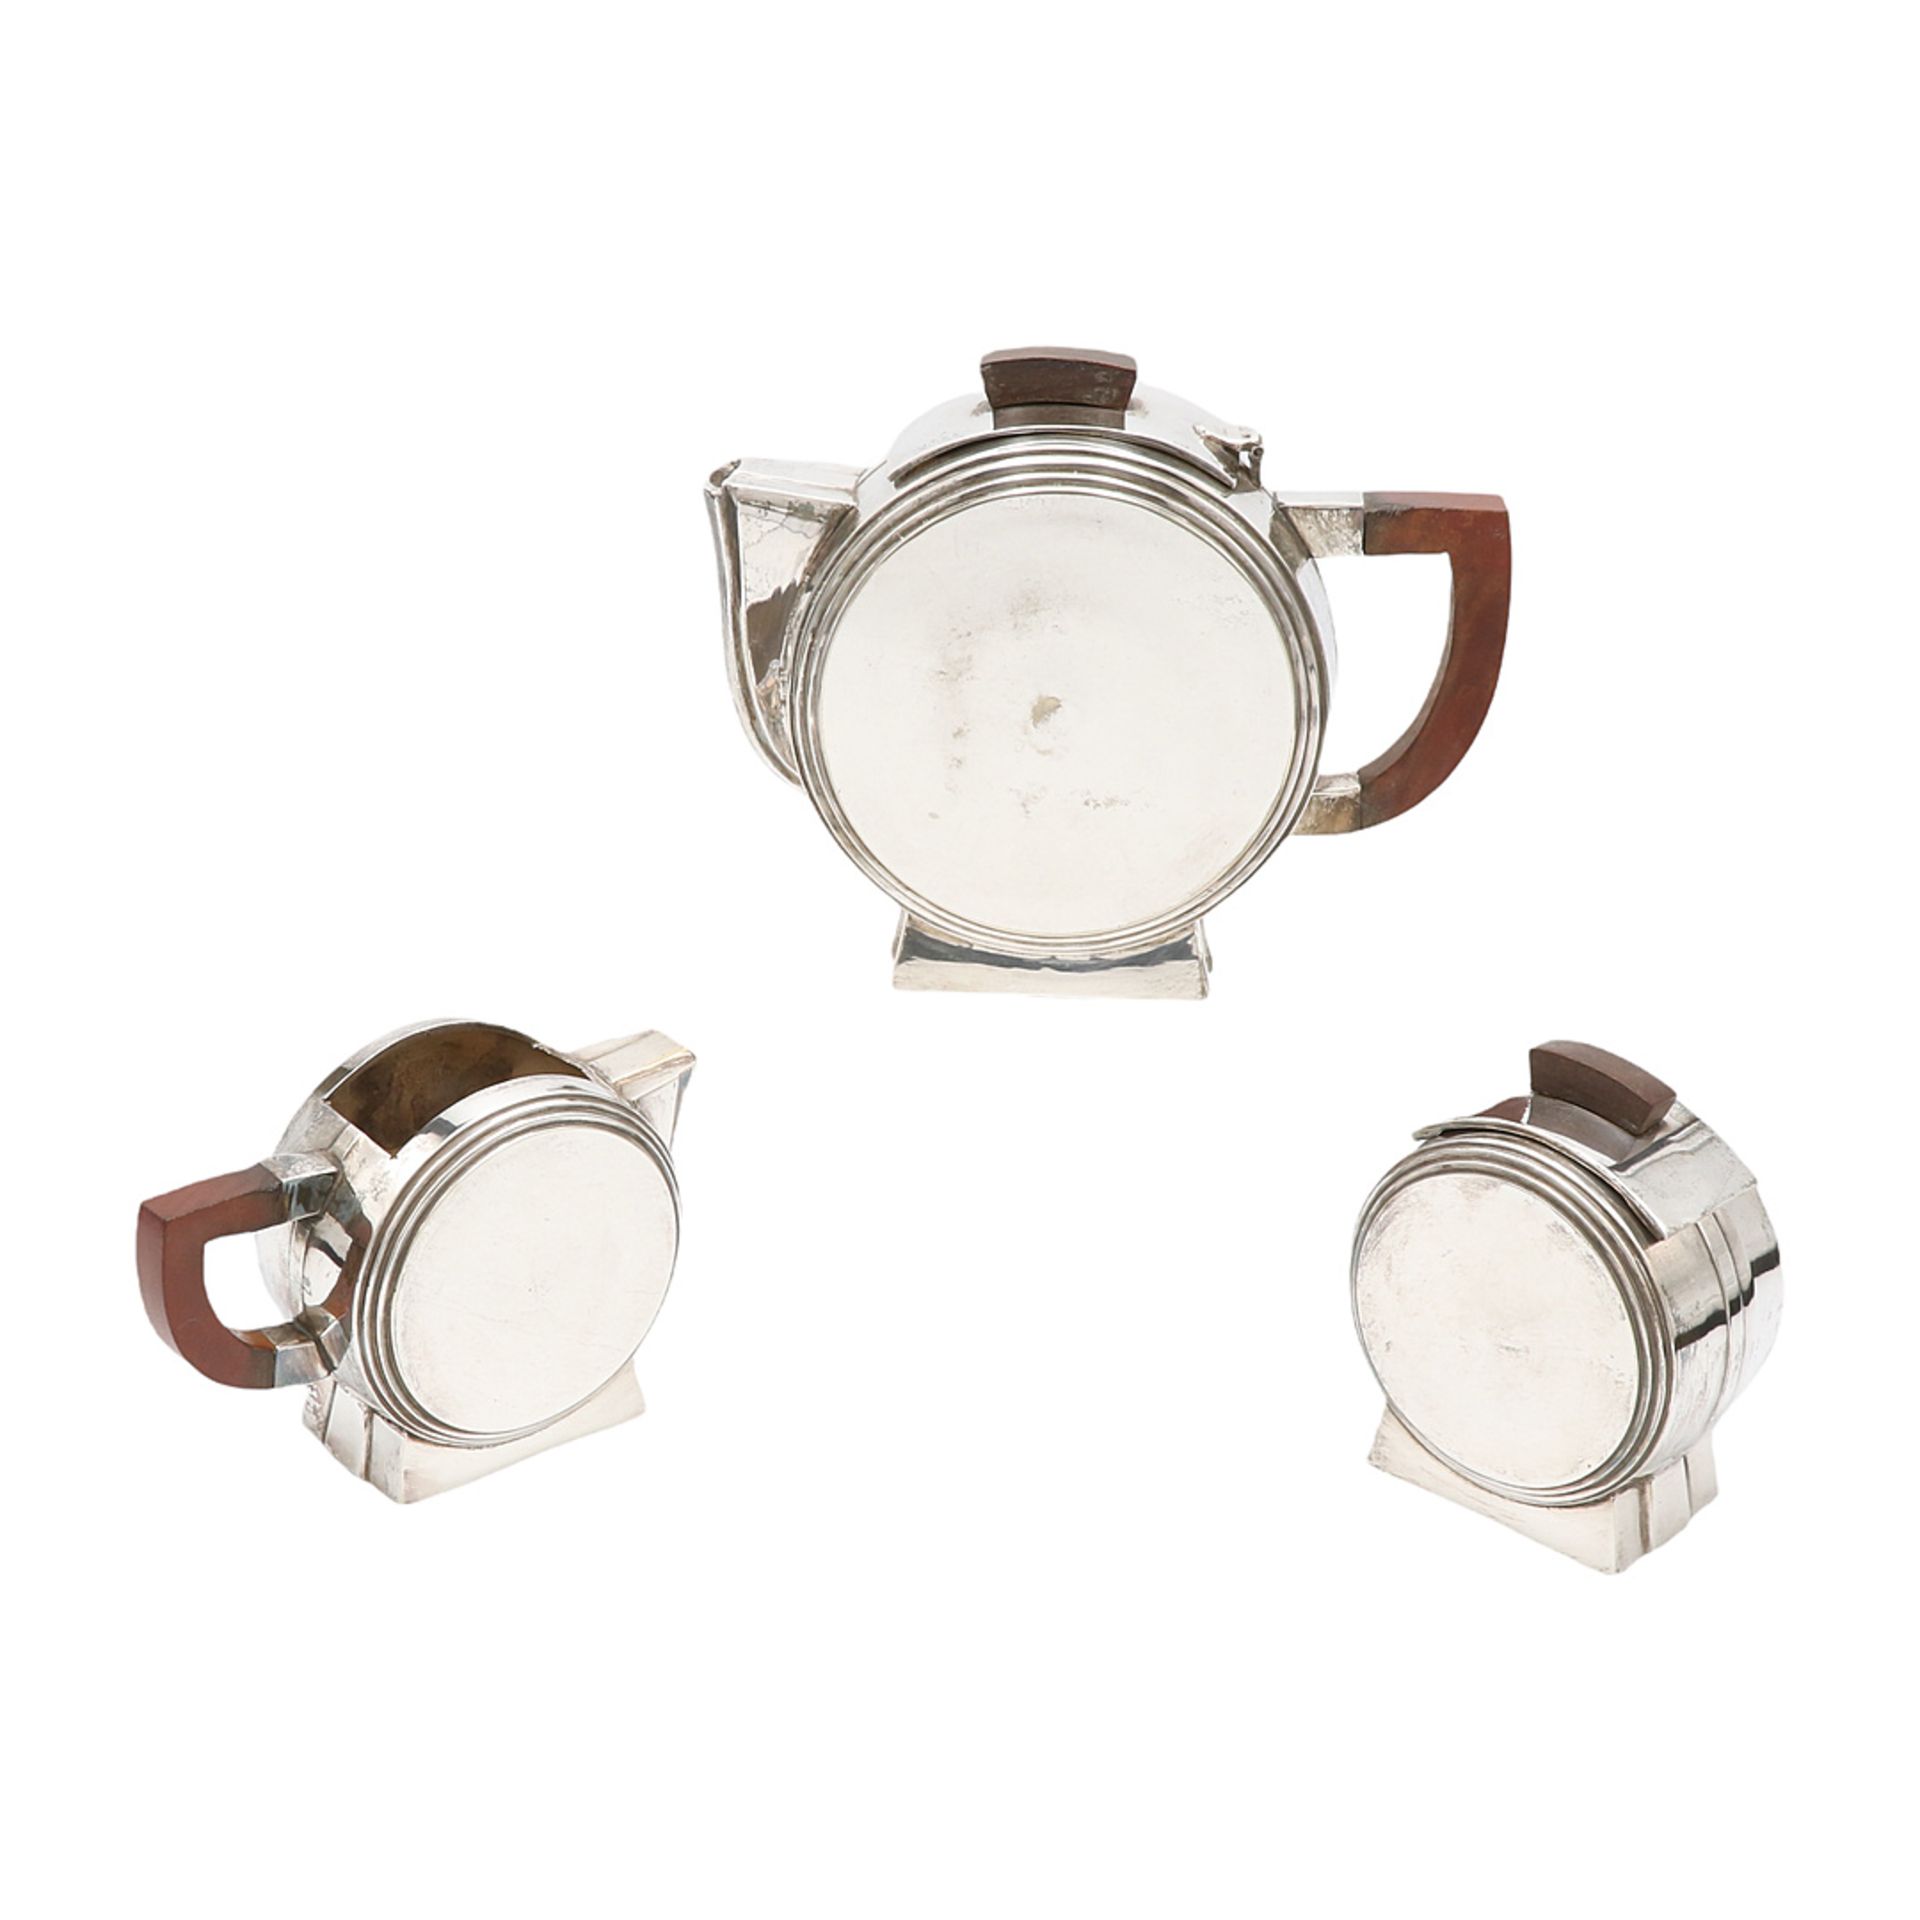 Three-piece tea or coffee service, probably France, Art Deco style